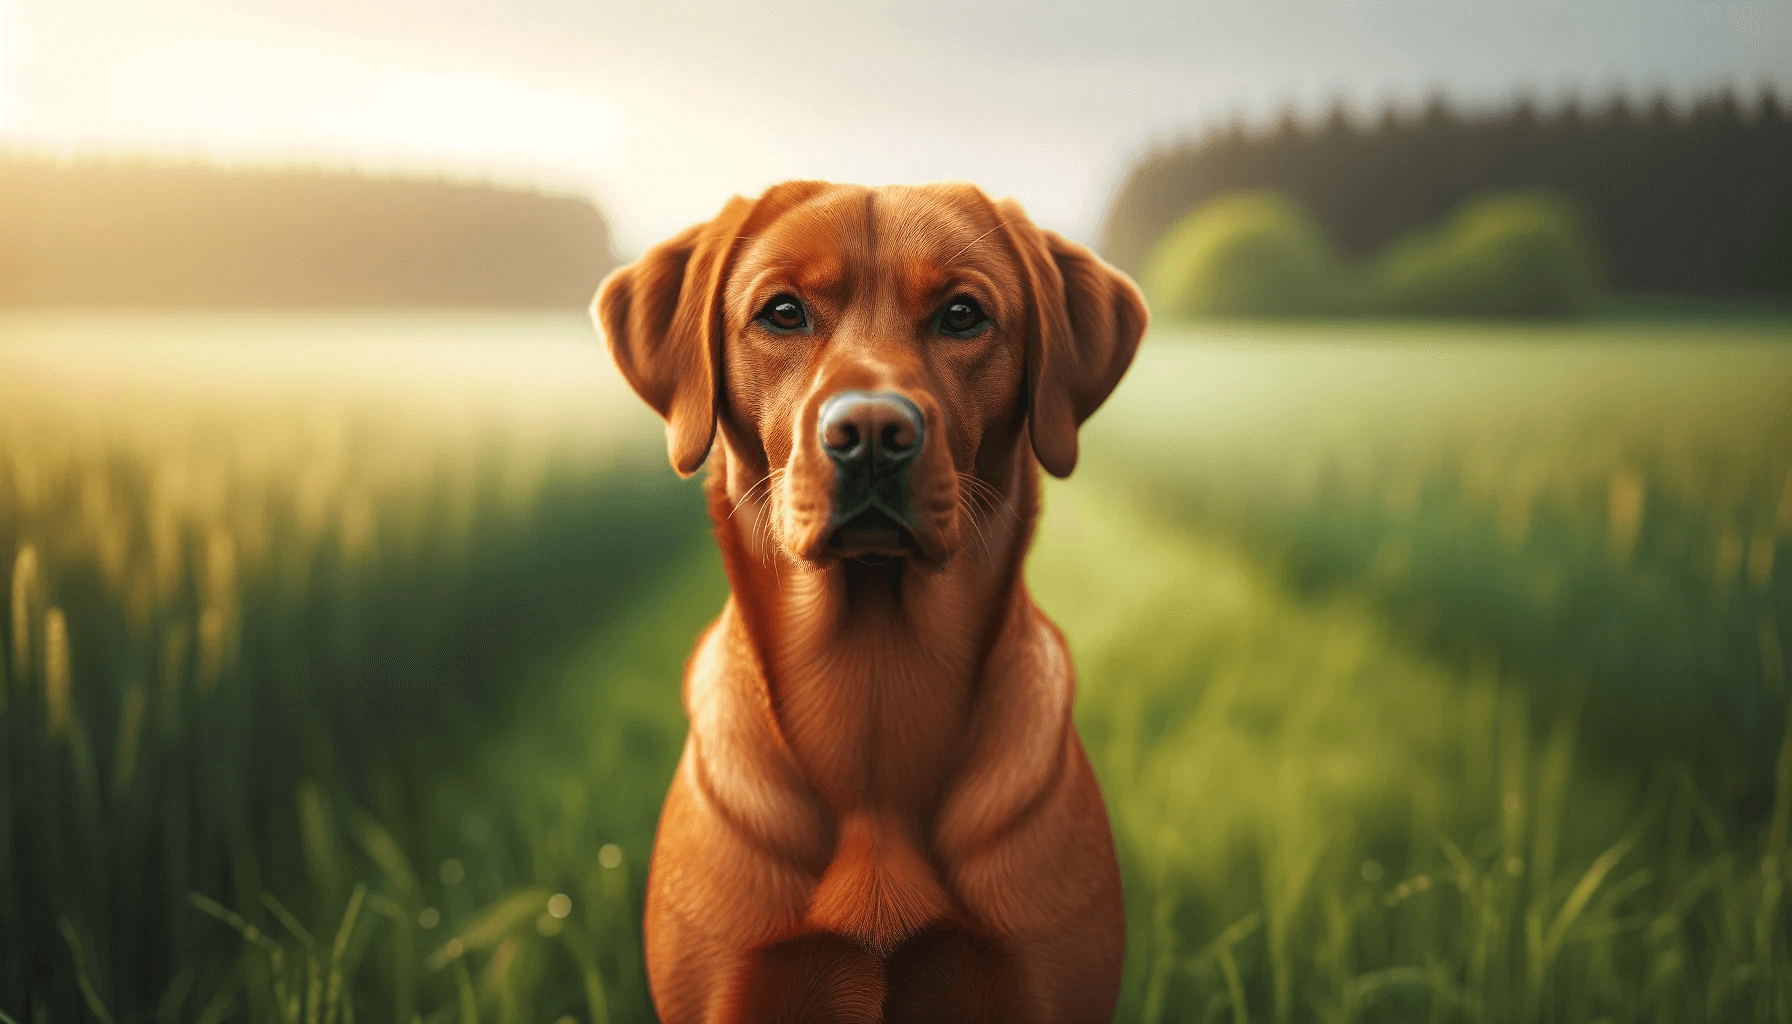 Red Fox Labrador Retriever standing in a green field viewed from the front at a low angle